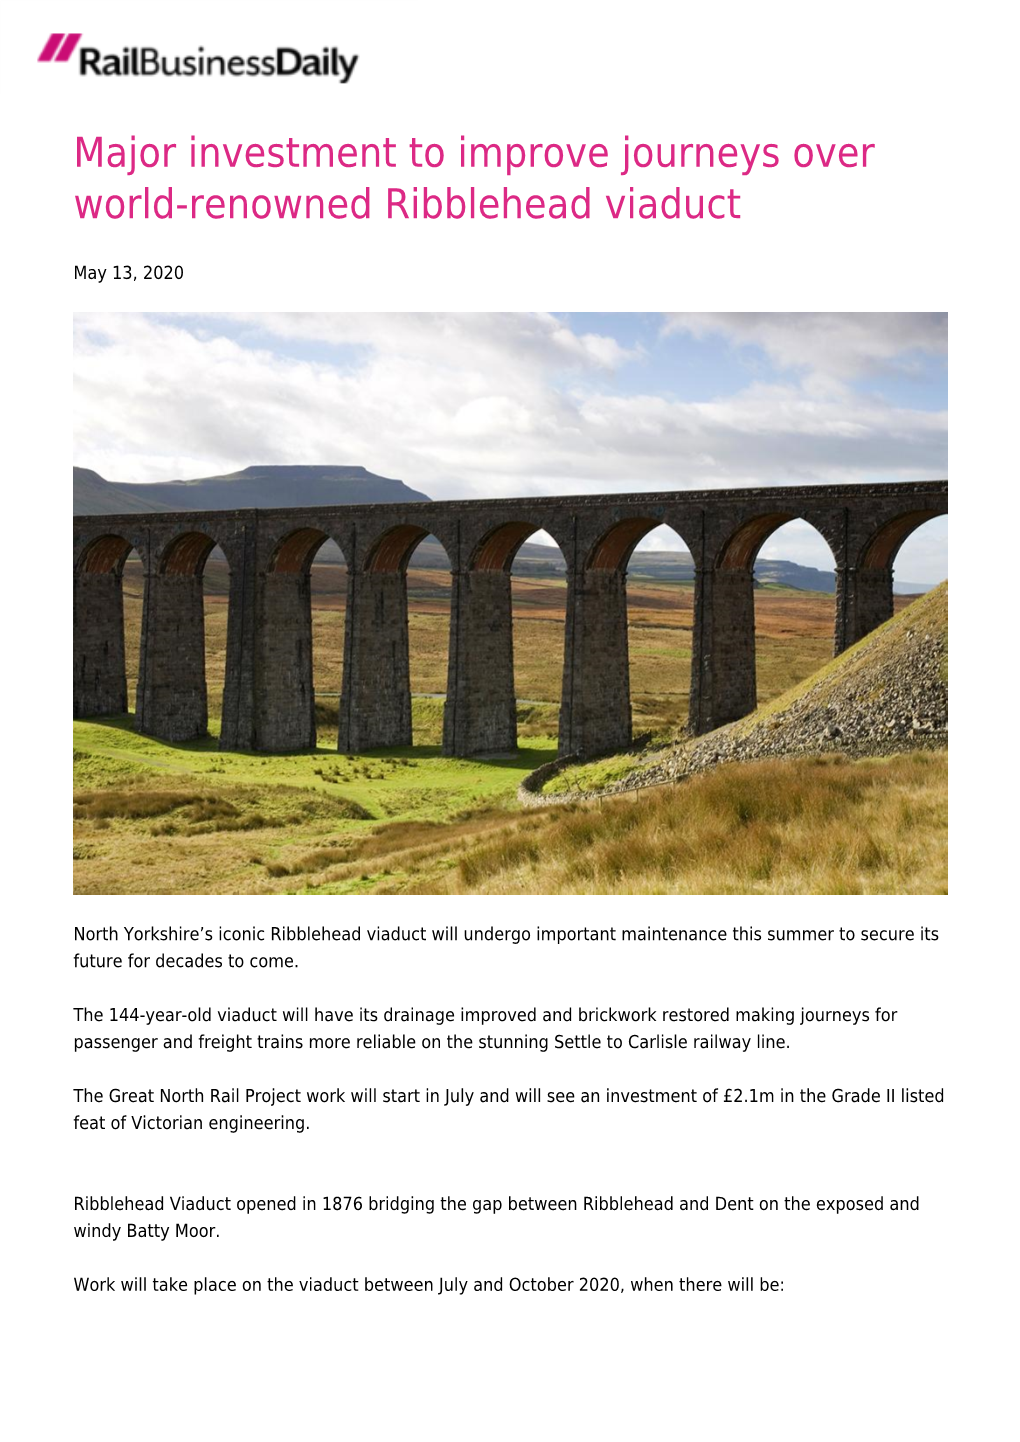 Major Investment to Improve Journeys Over World-Renowned Ribblehead Viaduct